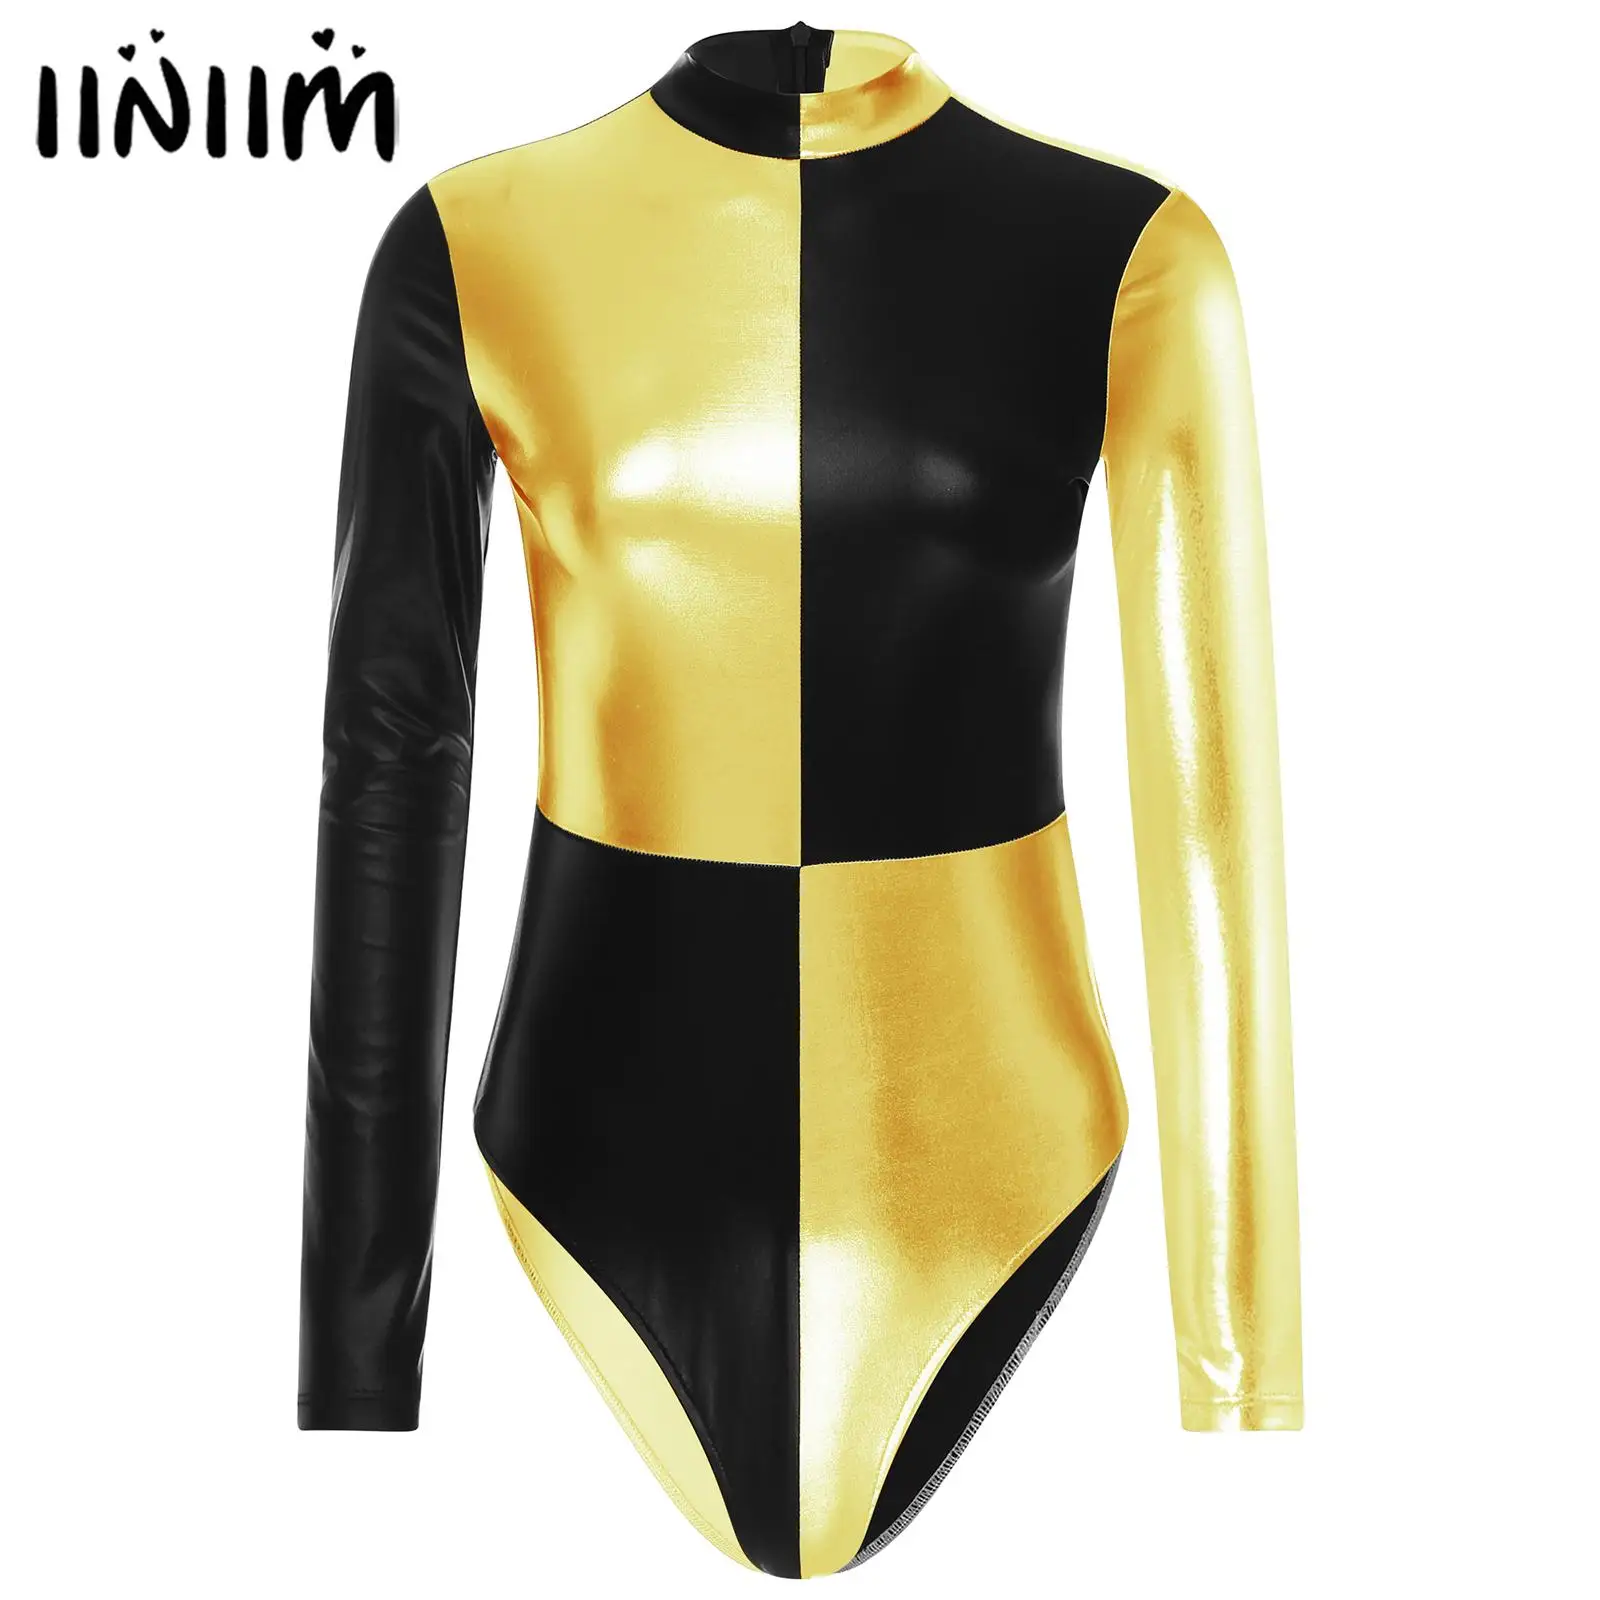 

Womens Long Sleeve Bodysuit for Pole Dancing Metallic Shiny Mock Neck Catsuit Invisible Zipper Back Leotard Cosplay Clubwear